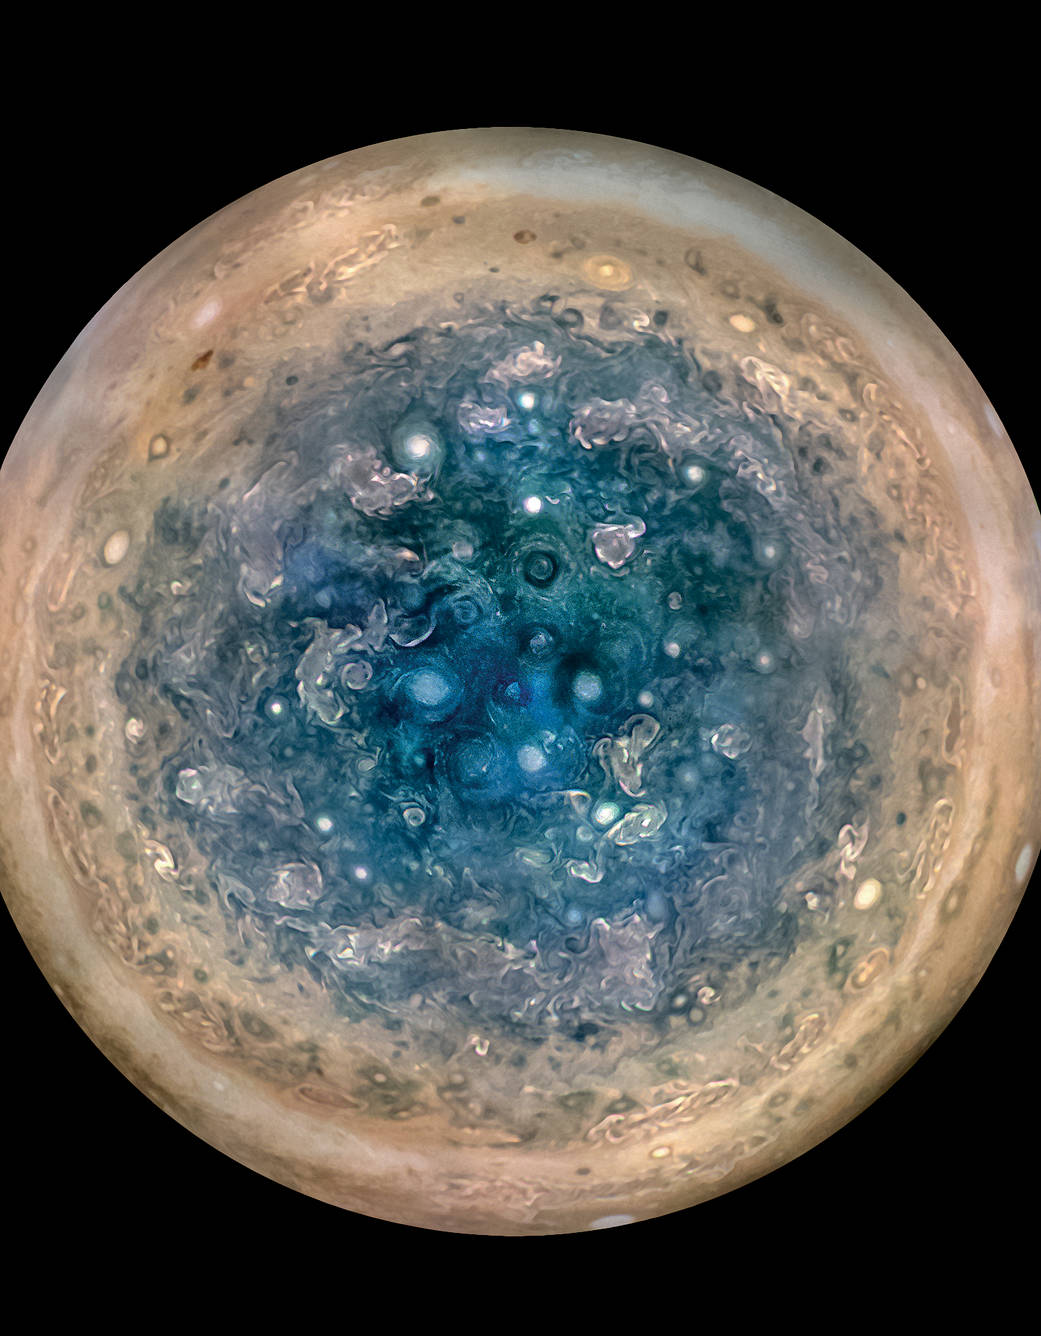 This image, which will be included in the talk, shows Jupiter’s south pole, as seen by NASA’s Juno spacecraft from an altitude of 32,000 miles (52,000 kilometers). The oval features are cyclones, up to 600 miles (1,000 kilometers) in diameter. Multiple images taken with the JunoCam instrument on three separate orbits were combined to show all areas in daylight, enhanced color, and stereographic projection. Image Credit: NASA/JPL-Caltech/SwRI/MSSS/Betsy Asher Hall/Gervasio Robles